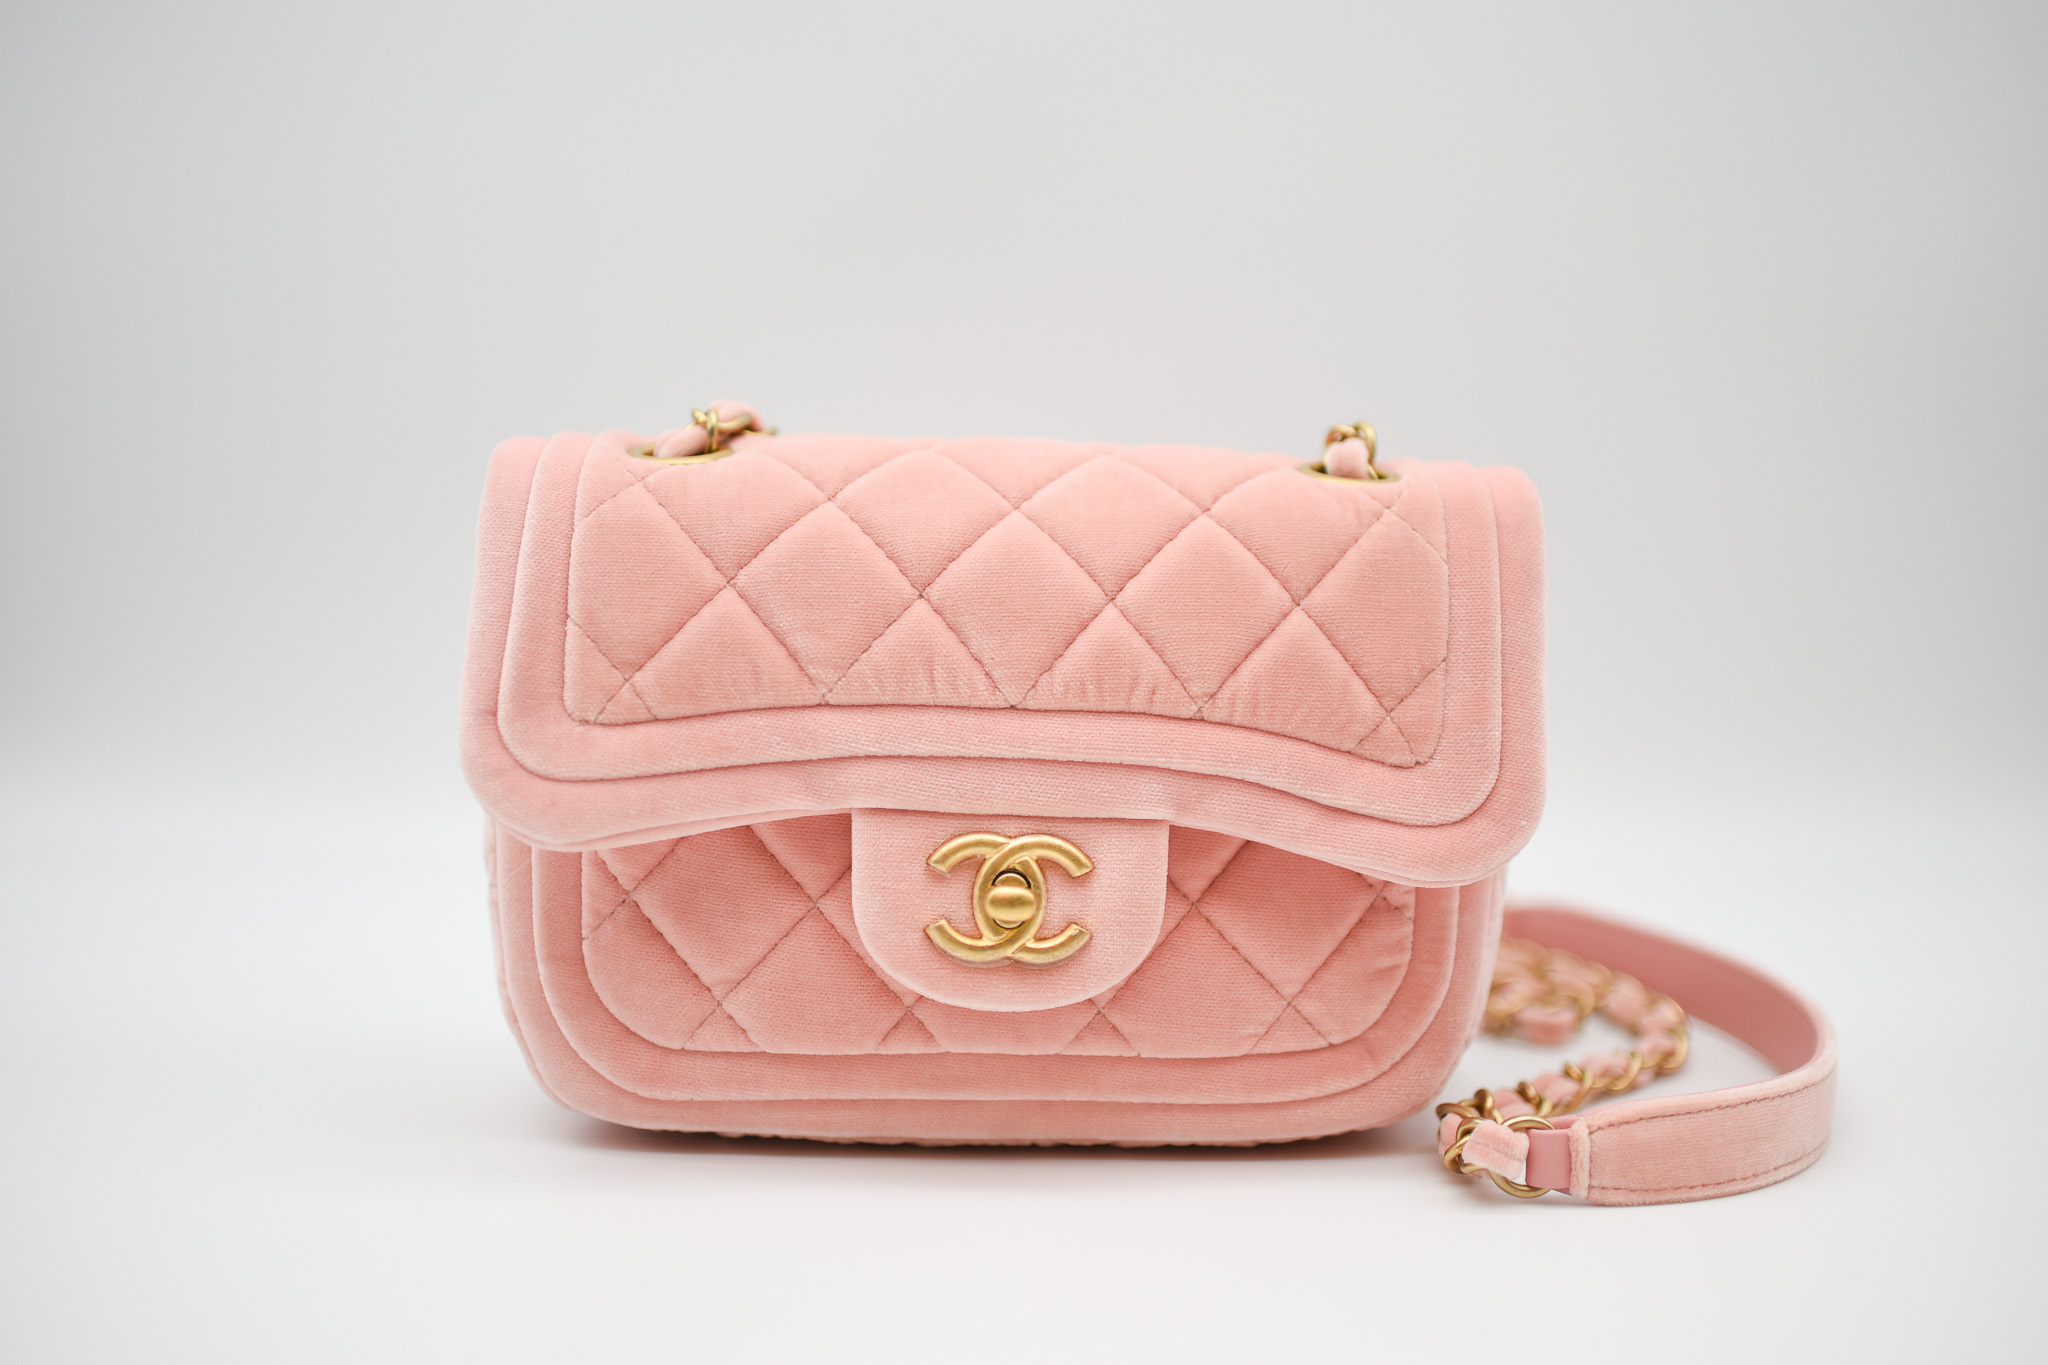 Chanel Seasonal Flap, Pink Velvet with Gold Hardware, New in Box WA001